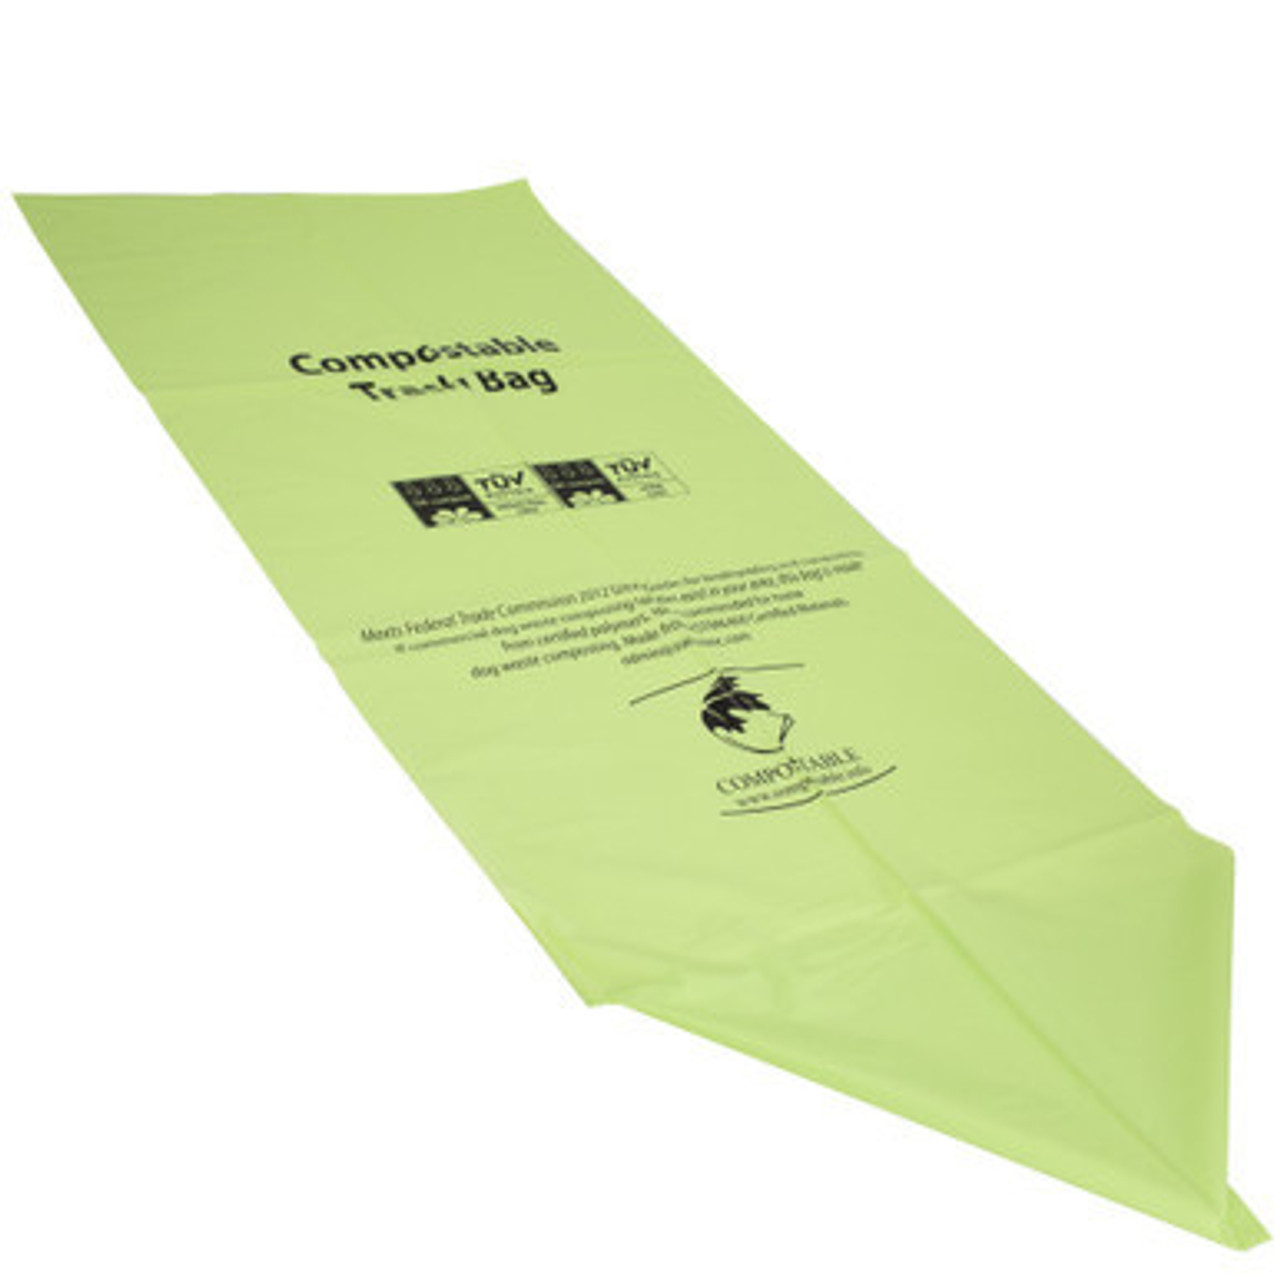 Compostable Dog Station Can Liner - Medium (8-13 gallons) Case of 200